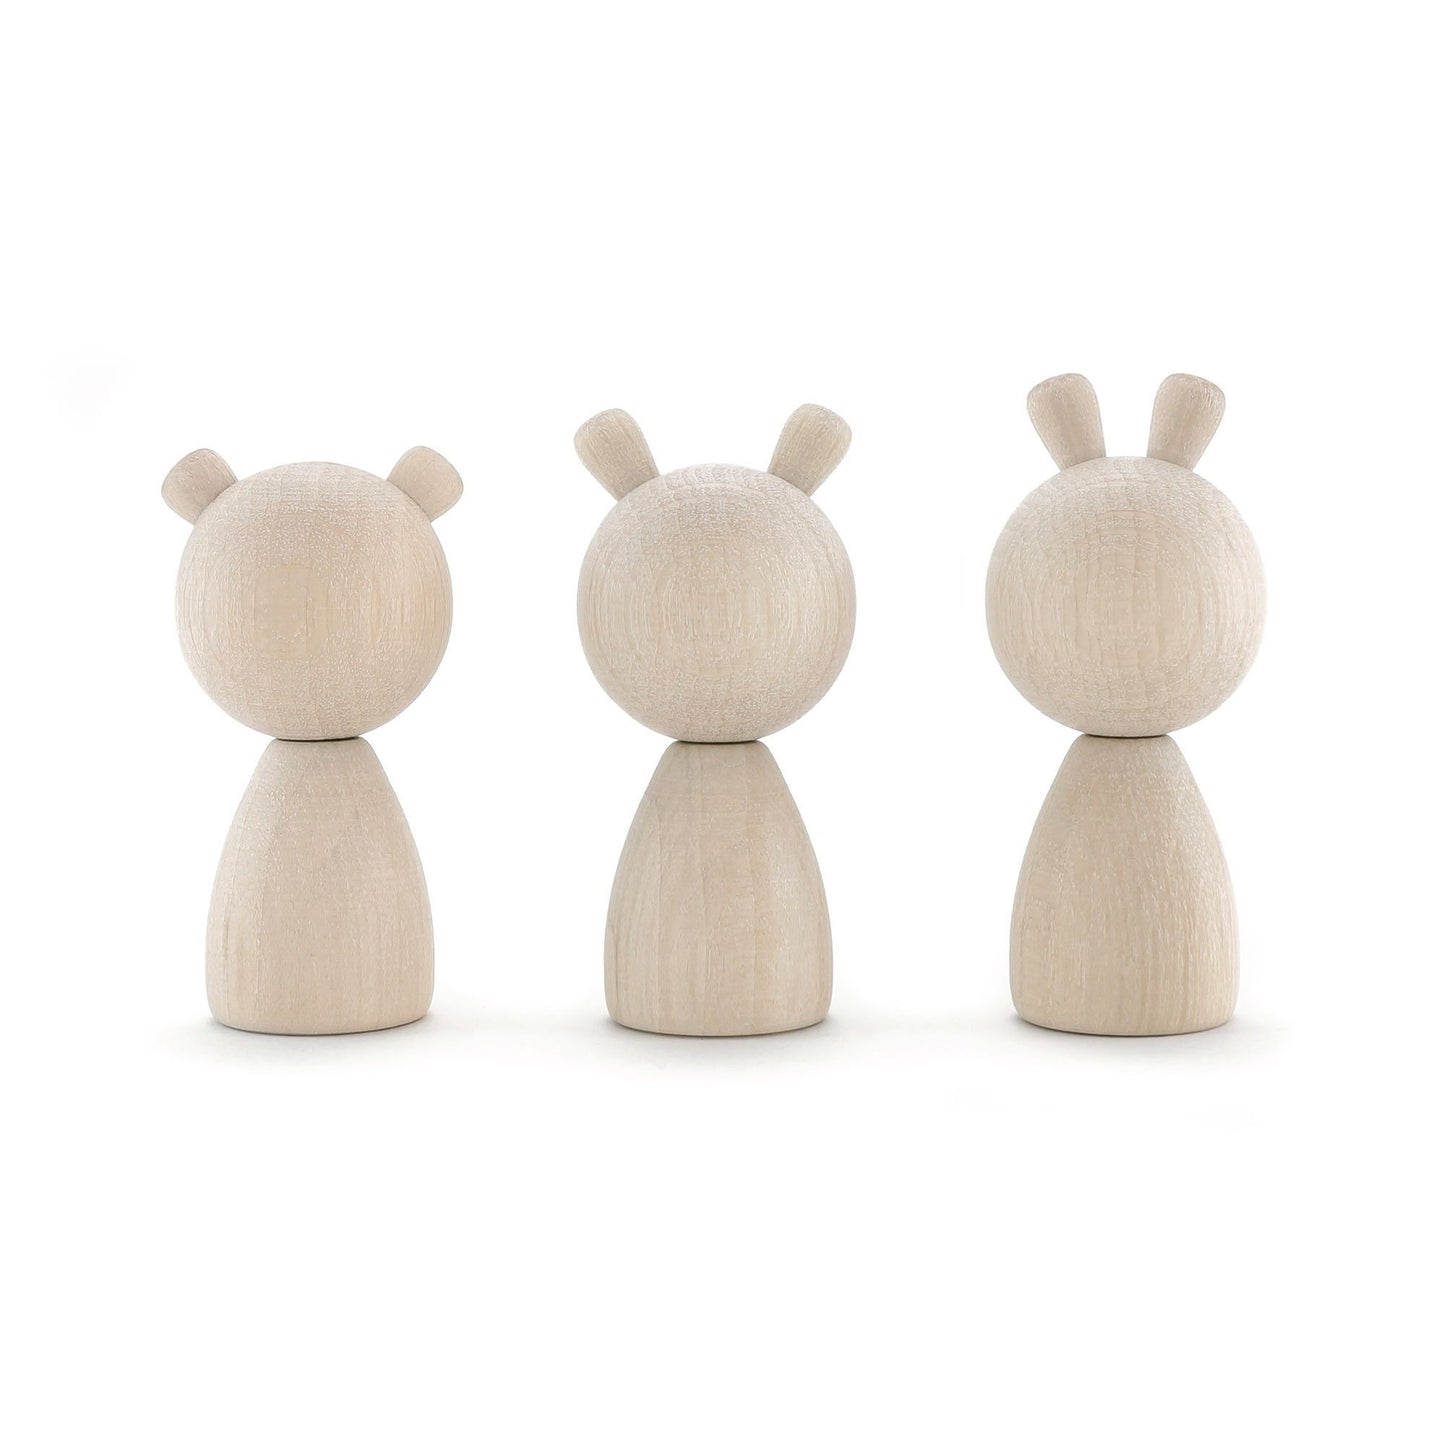 CLiCQUES Magnetic FAUNA (DIY) - Robert, Ginger and Bunji - Wood Wood Toys Canada's Favourite Montessori Toy Store